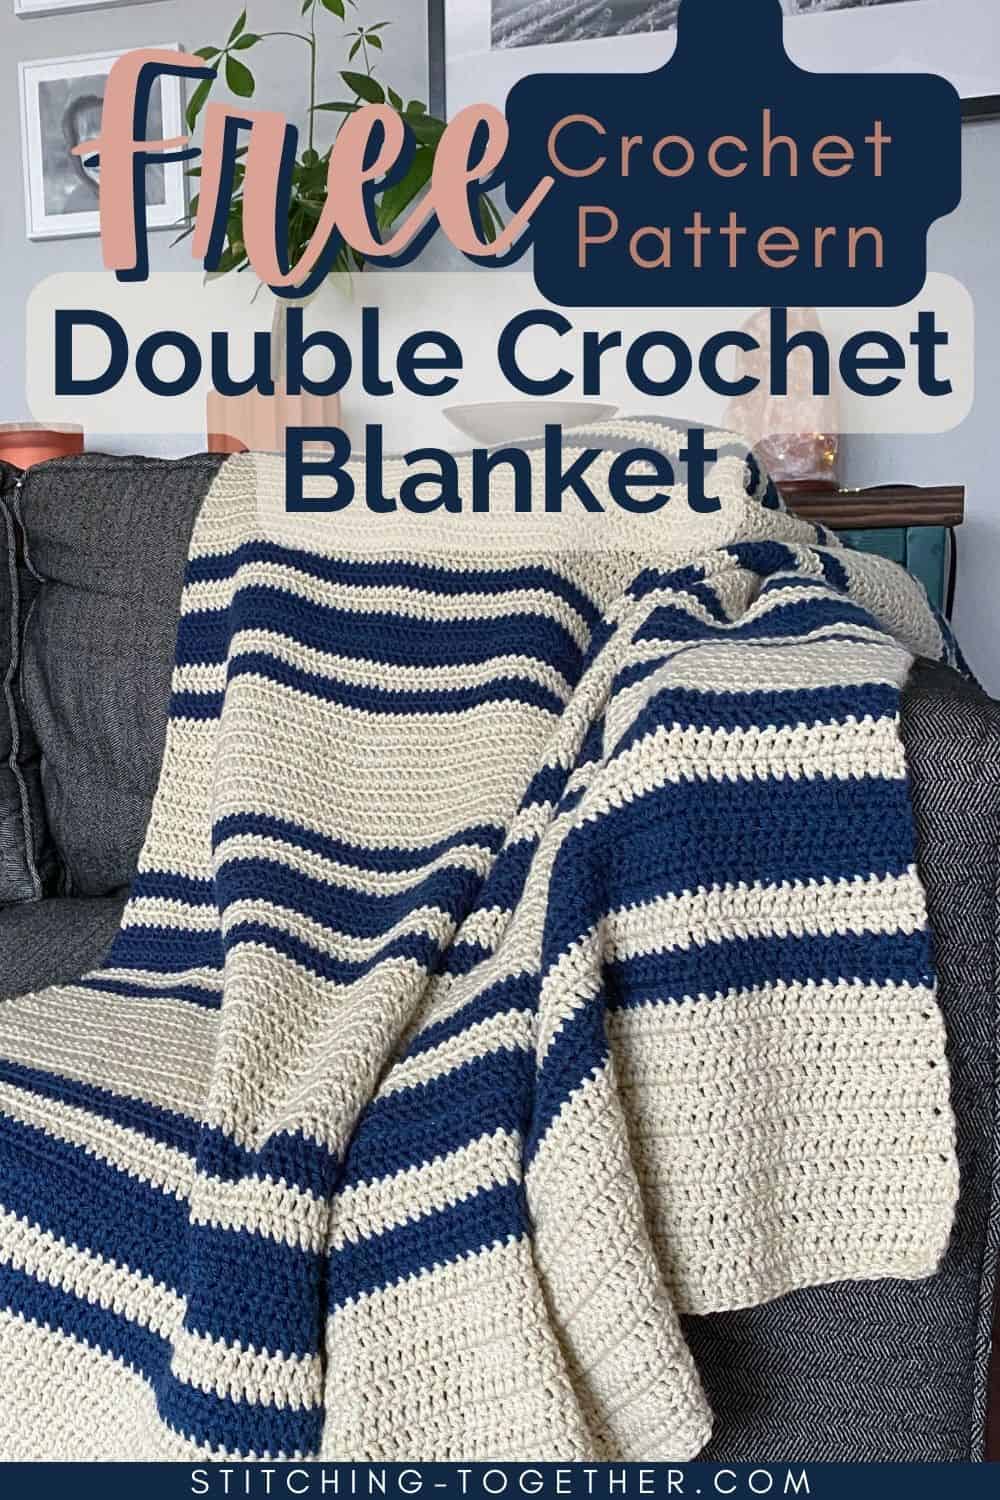 graphic reading " free crochet pattern, double crochet blanket" with striped crochet blanket on a couch in the background